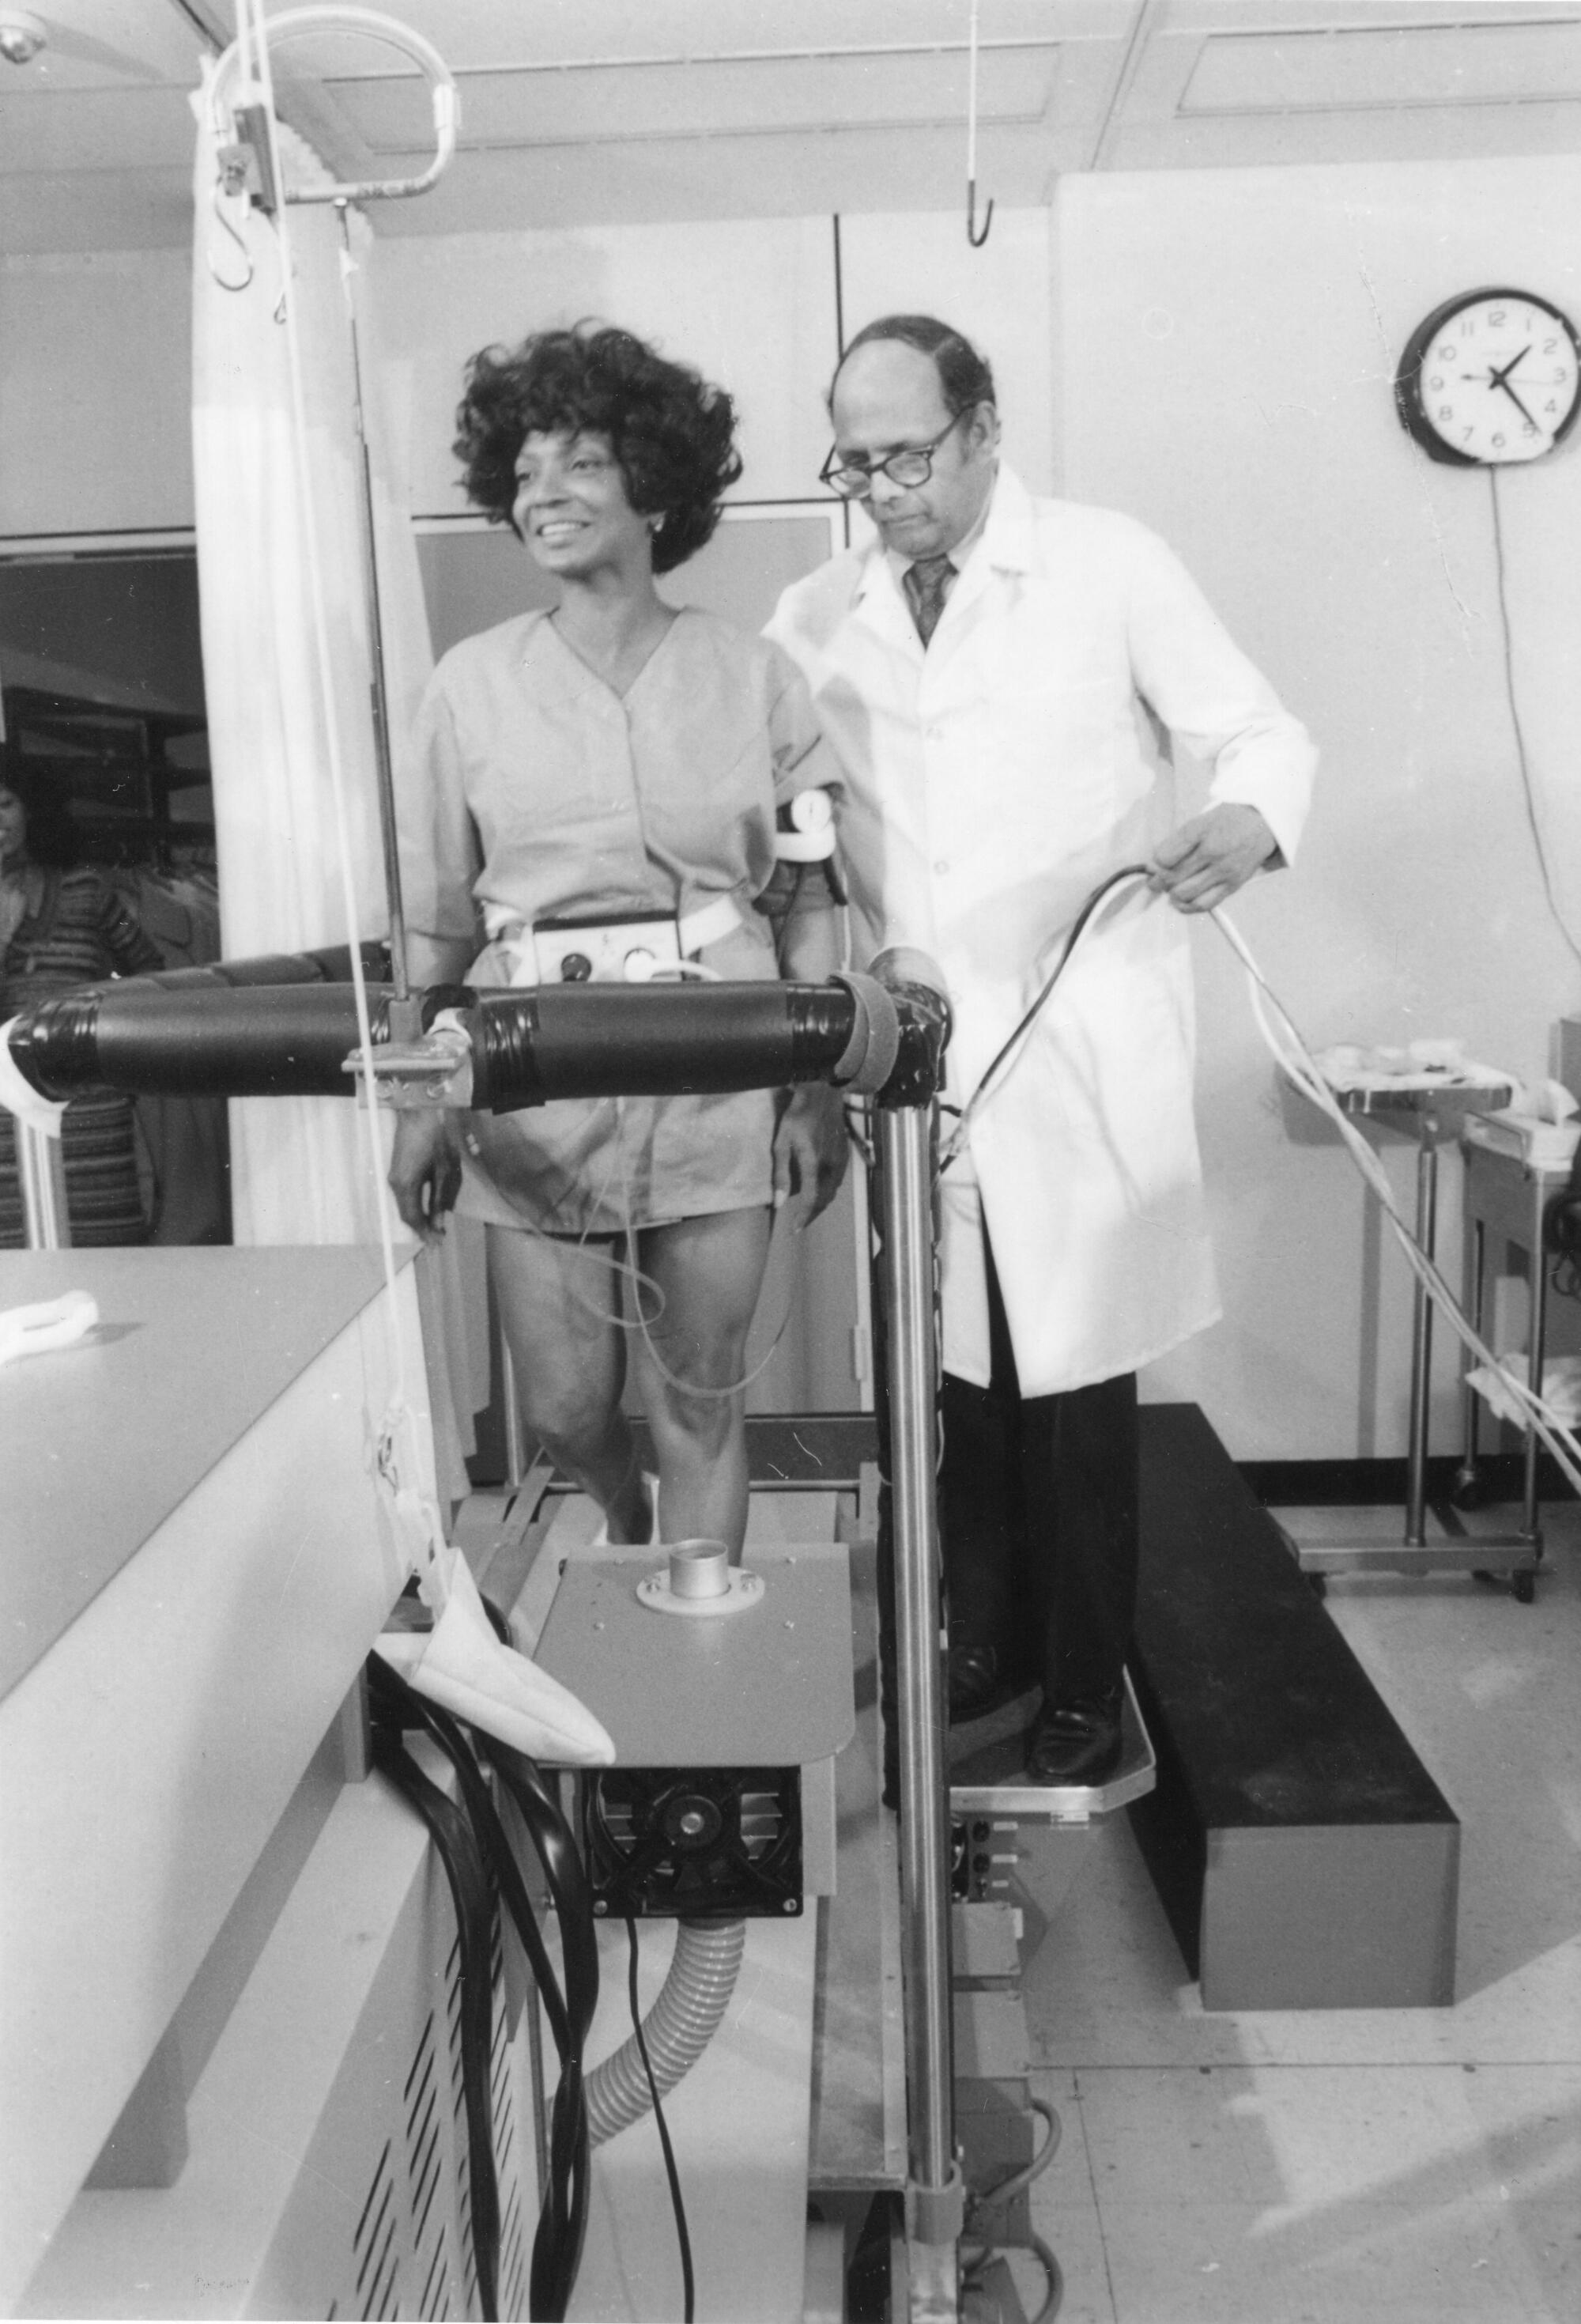 With a NASA doctor nearby, Nichelle Nichols walks on a treadmill in 1977 as part of her work recruiting women and POC. 